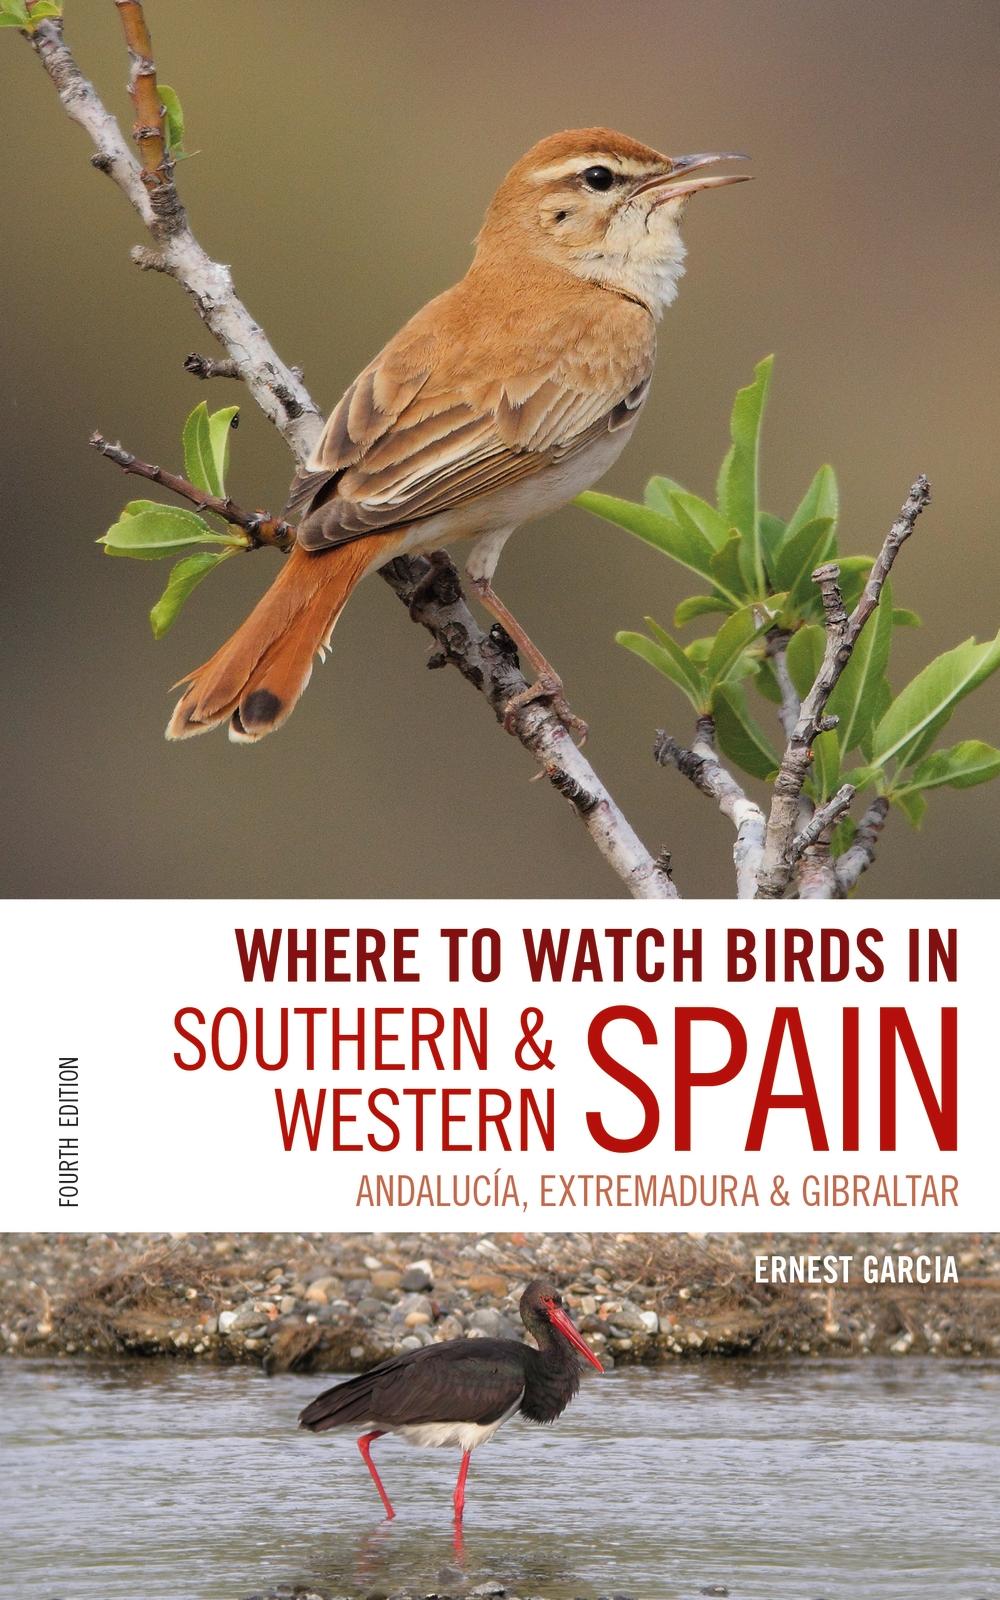 Where to Watch Birds in Southern and Western Spain - Ernest Garcia